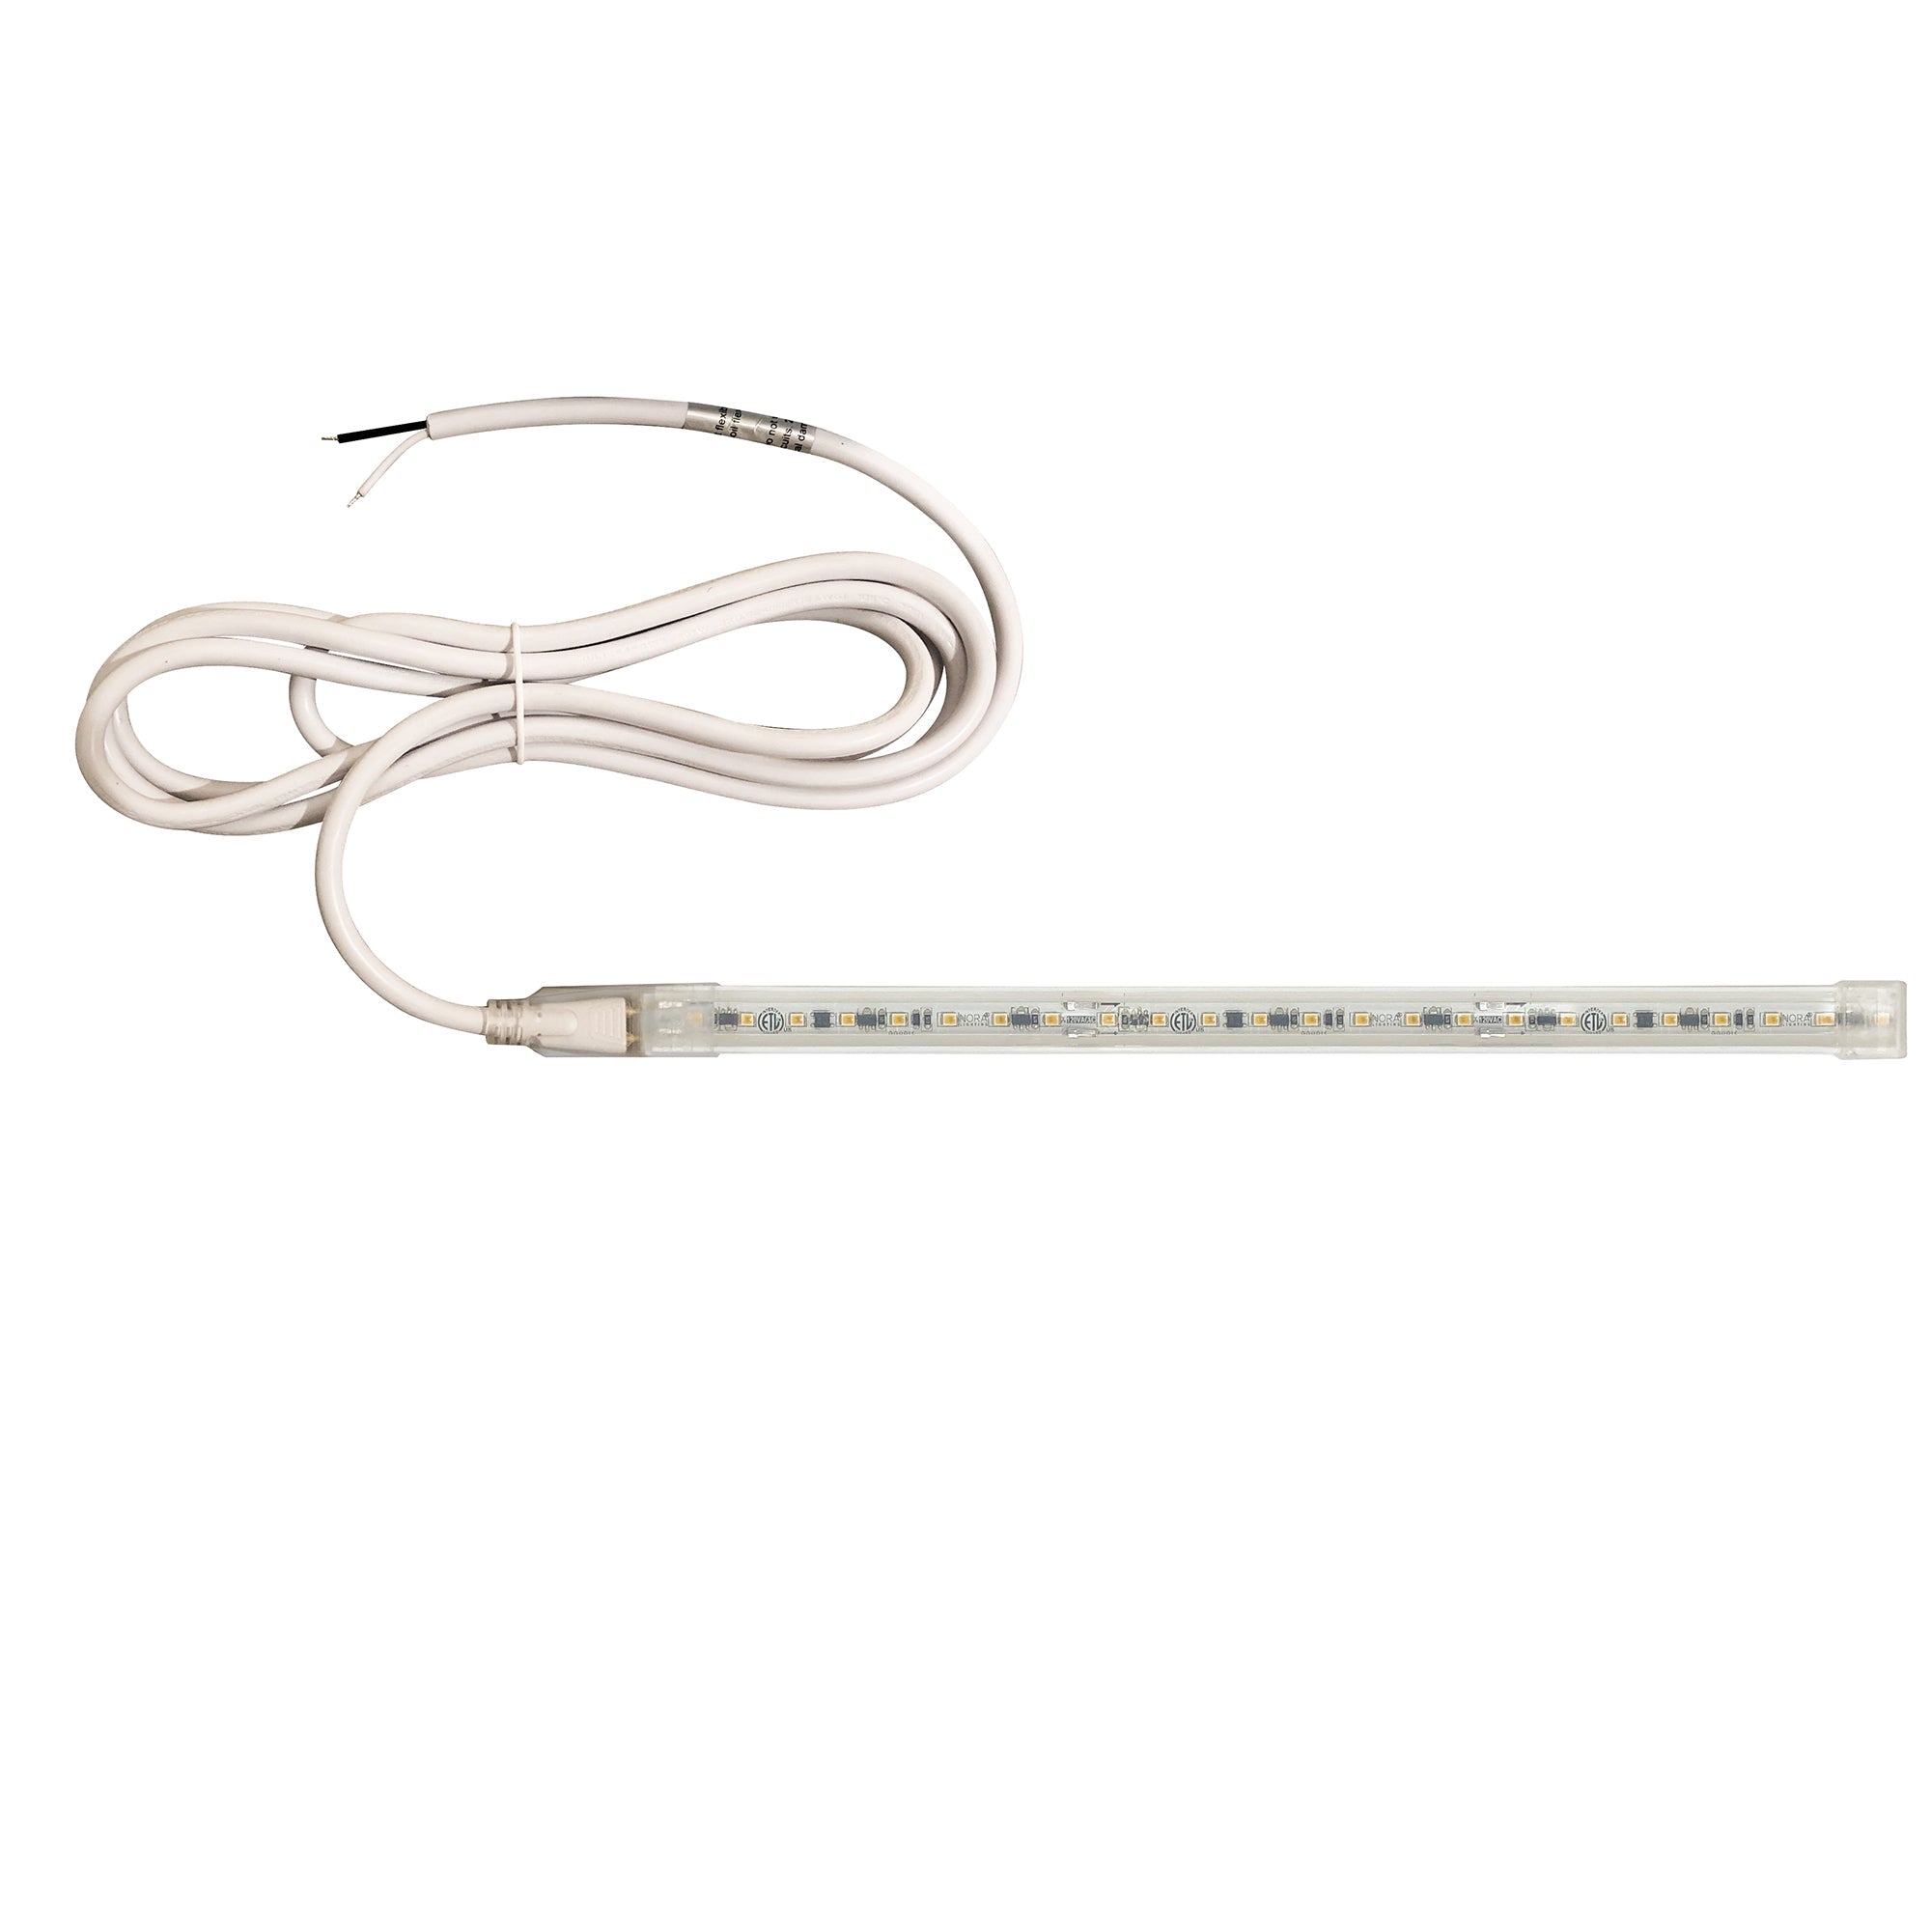 Nora Lighting NUTP13-W61-12-940/HW - Accent / Undercabinet - Custom Cut 61-ft 120V Continuous LED Tape Light, 330lm / 3.6W per foot, 4000K, w/ Mounting Clips and 8' Hardwired Power Cord